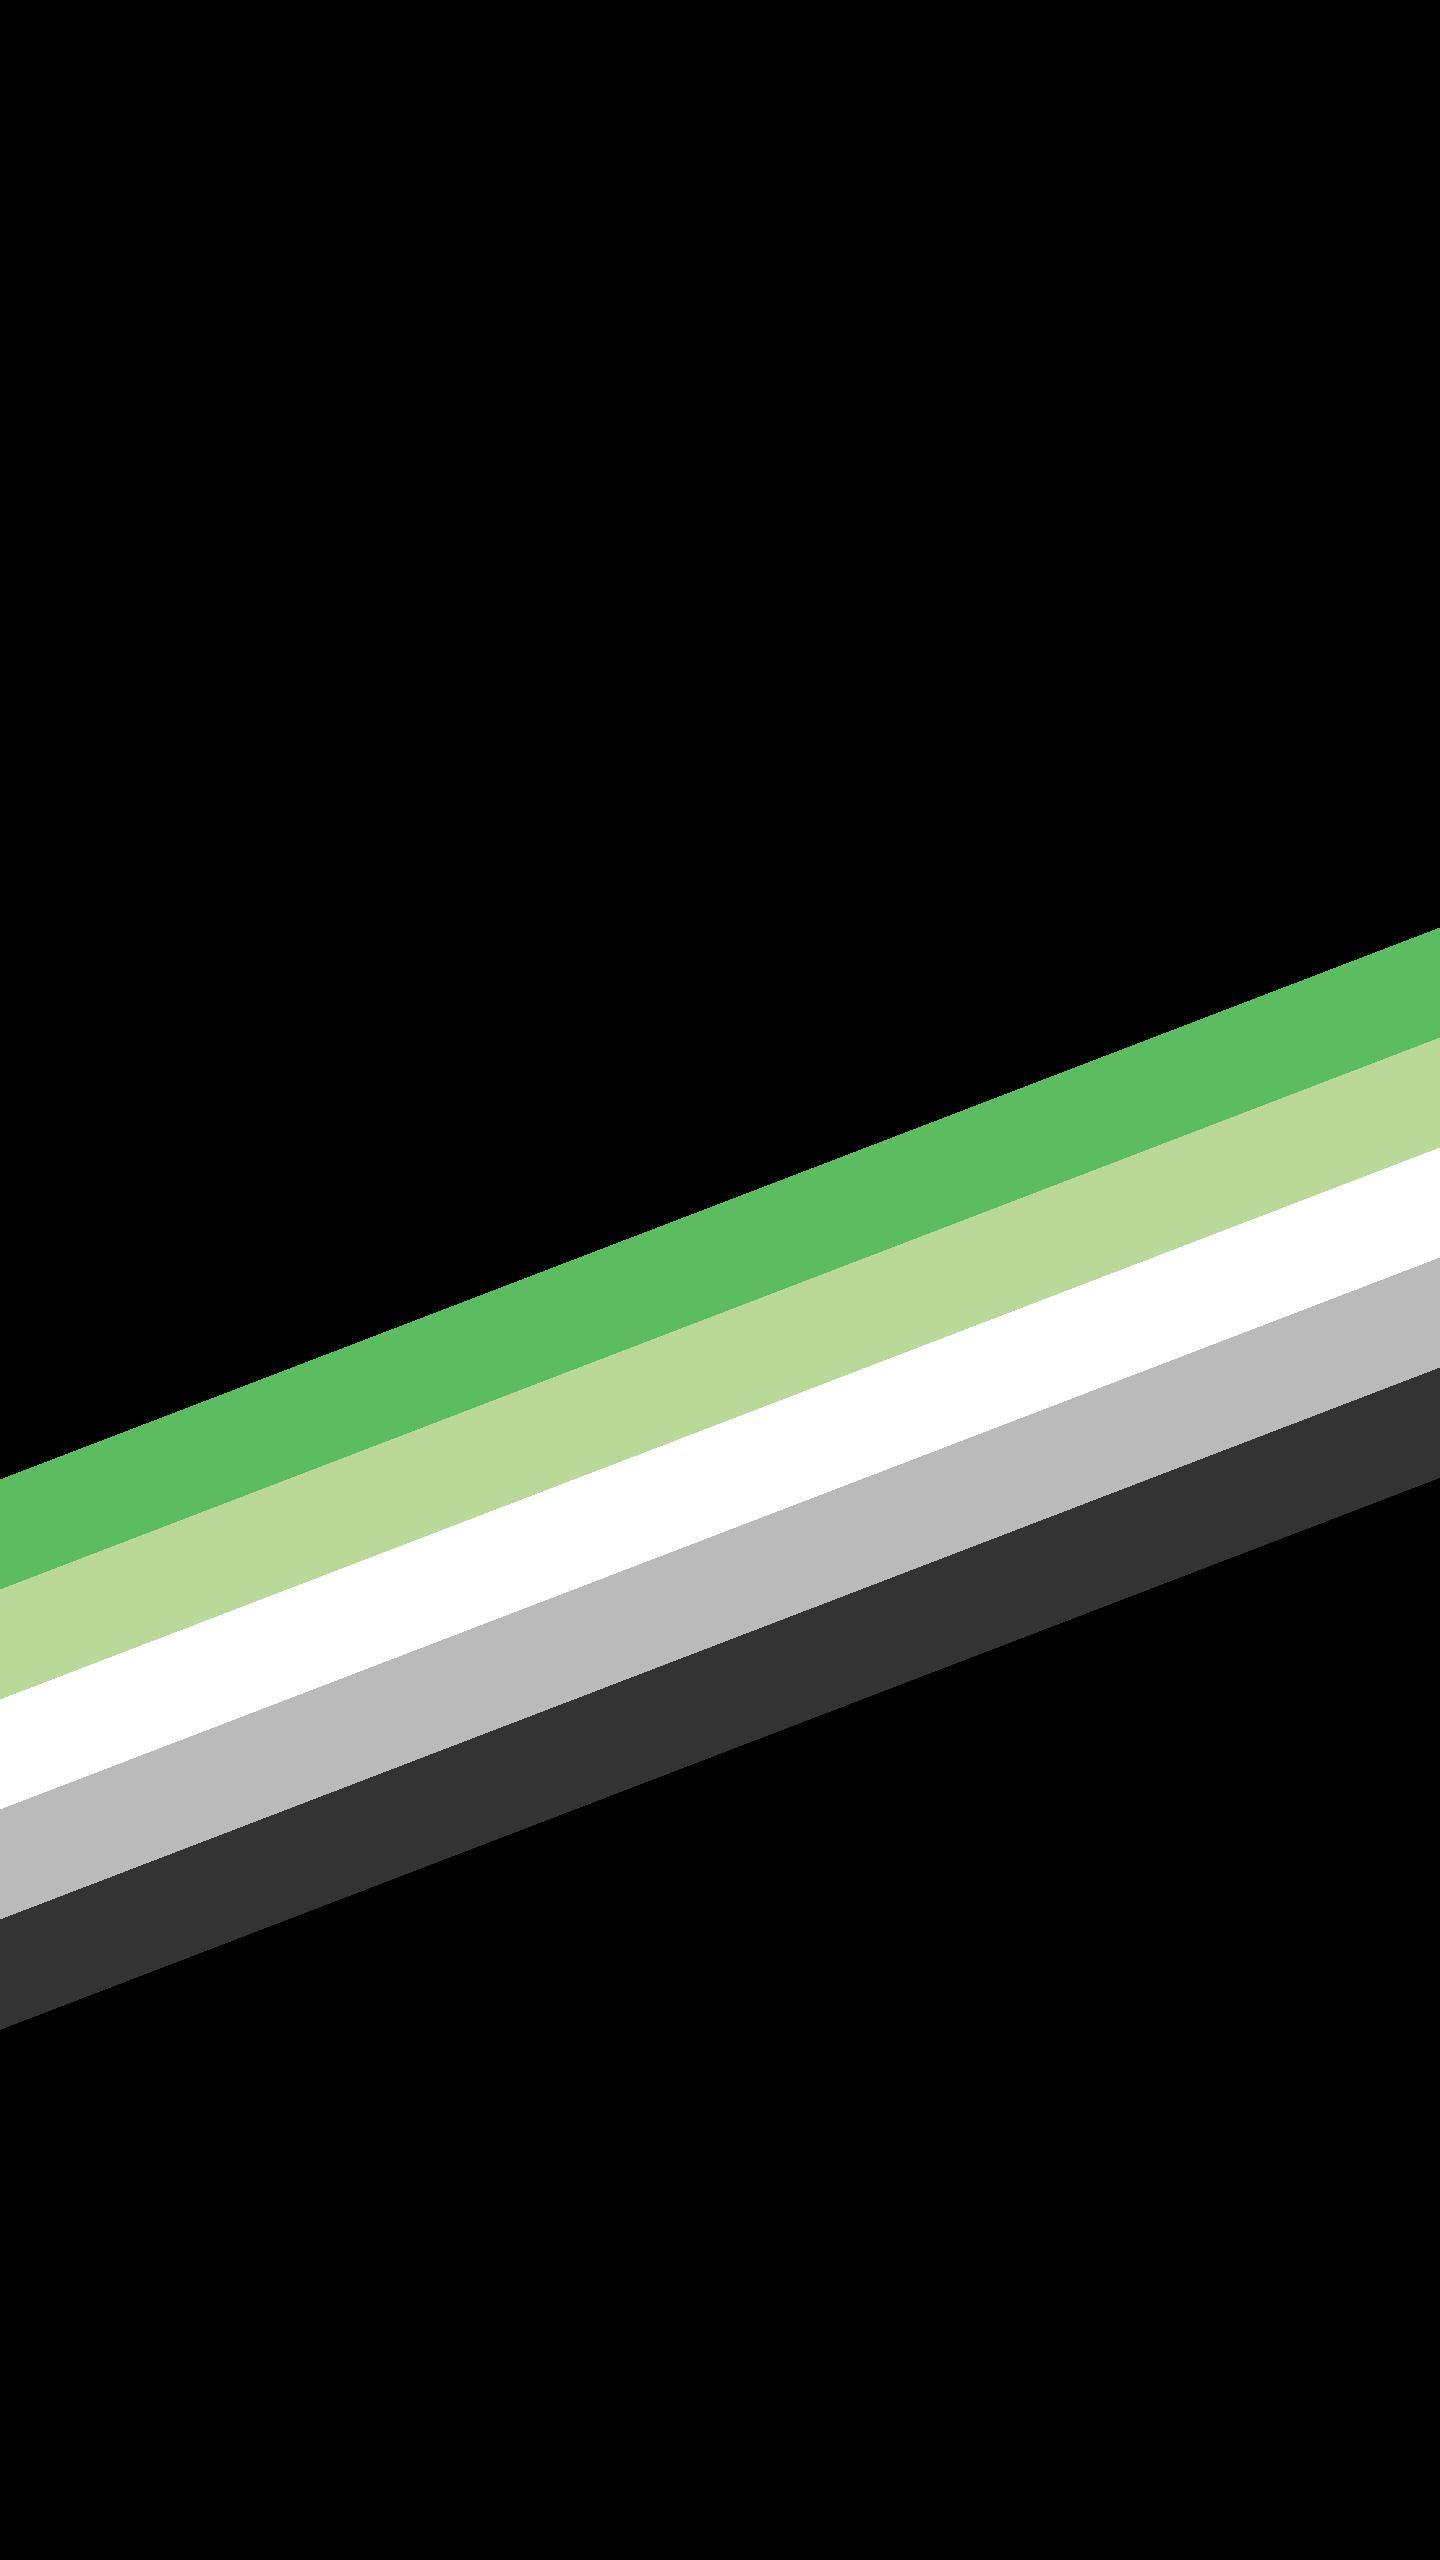 A black wallpaper with dark green, light green, white, grey and black stripes.